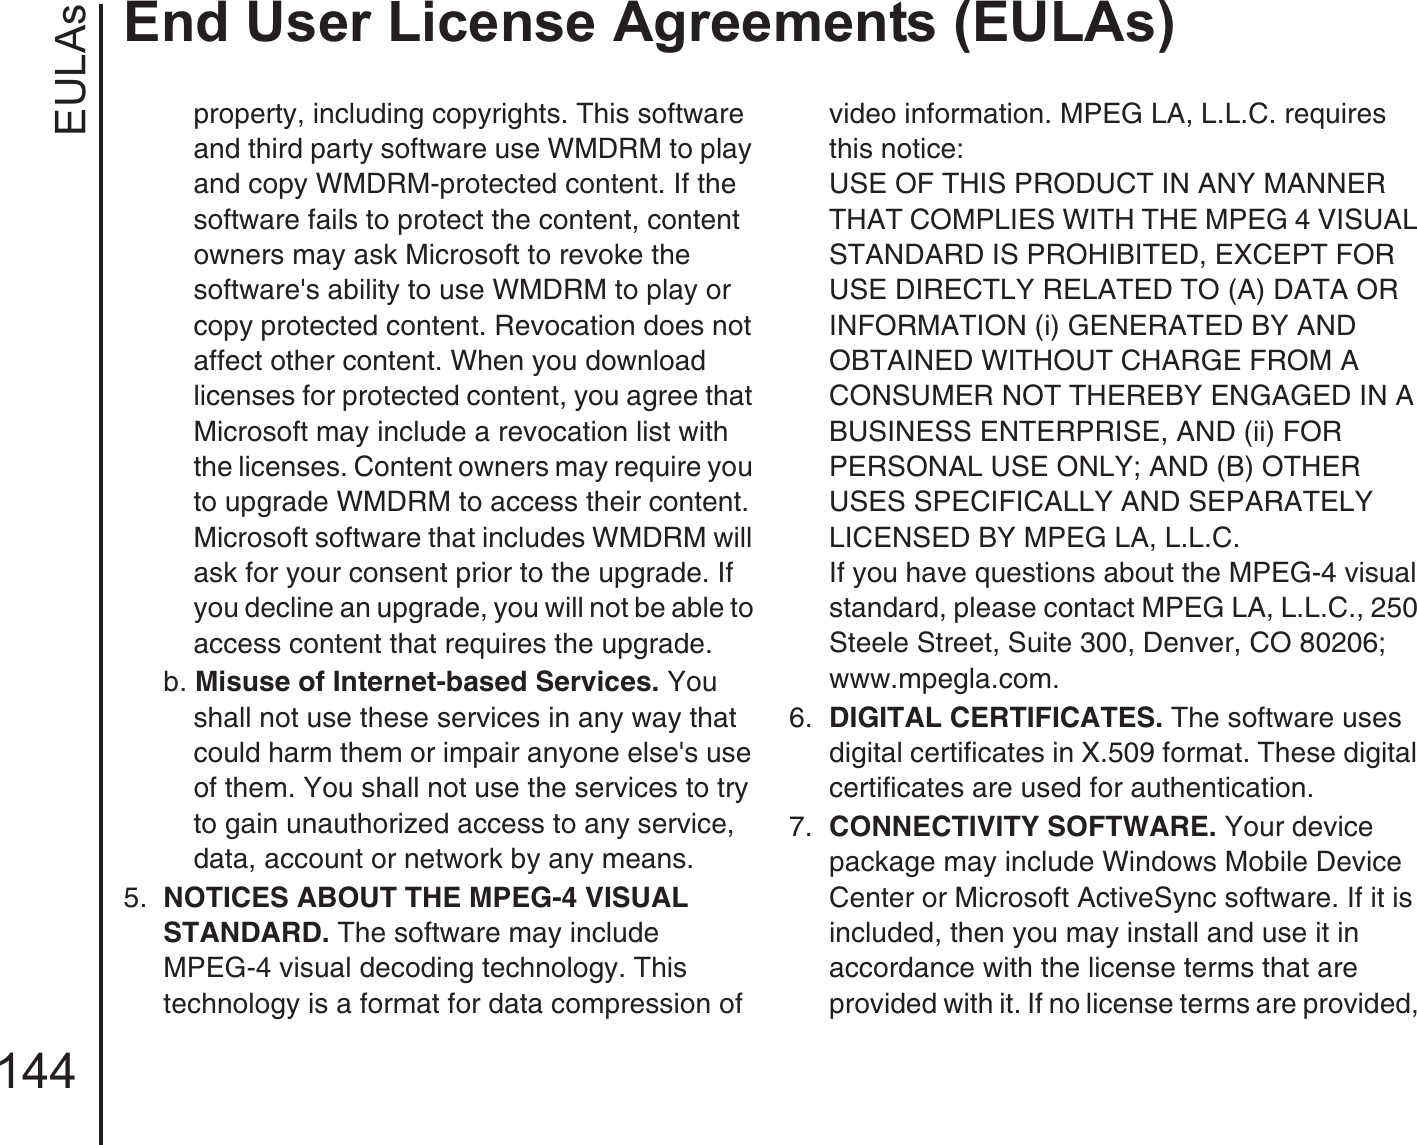 EULAsEnd User License Agreements (EULAs)144property, including copyrights. This software and third party software use WMDRM to play and copy WMDRM-protected content. If the software fails to protect the content, content owners may ask Microsoft to revoke the software&apos;s ability to use WMDRM to play or copy protected content. Revocation does not affect other content. When you download licenses for protected content, you agree that Microsoft may include a revocation list with the licenses. Content owners may require you to upgrade WMDRM to access their content. Microsoft software that includes WMDRM will ask for your consent prior to the upgrade. If you decline an upgrade, you will not be able to access content that requires the upgrade. b. Misuse of Internet-based Services. You shall not use these services in any way that could harm them or impair anyone else&apos;s use of them. You shall not use the services to try to gain unauthorized access to any service, data, account or network by any means.5.  NOTICES ABOUT THE MPEG-4 VISUAL STANDARD. The software may includeMPEG-4 visual decoding technology. This technology is a format for data compression of video information. MPEG LA, L.L.C. requires this notice: USE OF THIS PRODUCT IN ANY MANNER THAT COMPLIES WITH THE MPEG 4 VISUAL STANDARD IS PROHIBITED, EXCEPT FOR USE DIRECTLY RELATED TO (A) DATA OR INFORMATION (i) GENERATED BY AND OBTAINED WITHOUT CHARGE FROM A CONSUMER NOT THEREBY ENGAGED IN A BUSINESS ENTERPRISE, AND (ii) FOR PERSONAL USE ONLY; AND (B) OTHER USES SPECIFICALLY AND SEPARATELY LICENSED BY MPEG LA, L.L.C. If you have questions about the MPEG-4 visual standard, please contact MPEG LA, L.L.C., 250 Steele Street, Suite 300, Denver, CO 80206; www.mpegla.com.6.  DIGITAL CERTIFICATES. The software uses digital certificates in X.509 format. These digital certificates are used for authentication. 7.  CONNECTIVITY SOFTWARE. Your device package may include Windows Mobile Device Center or Microsoft ActiveSync software. If it is included, then you may install and use it in accordance with the license terms that are provided with it. If no license terms are provided, 